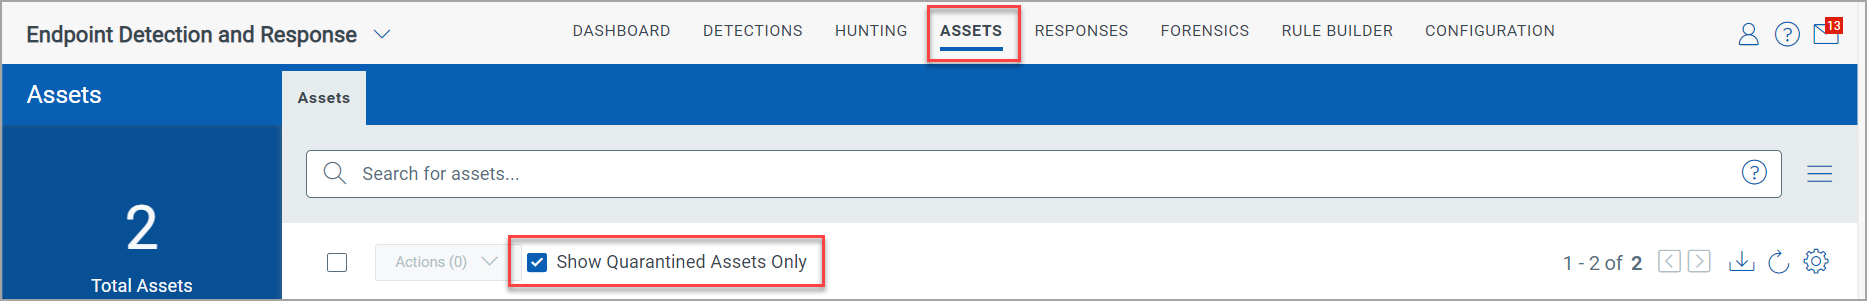 Show Quarantined Assets Only option in the Assets tab.